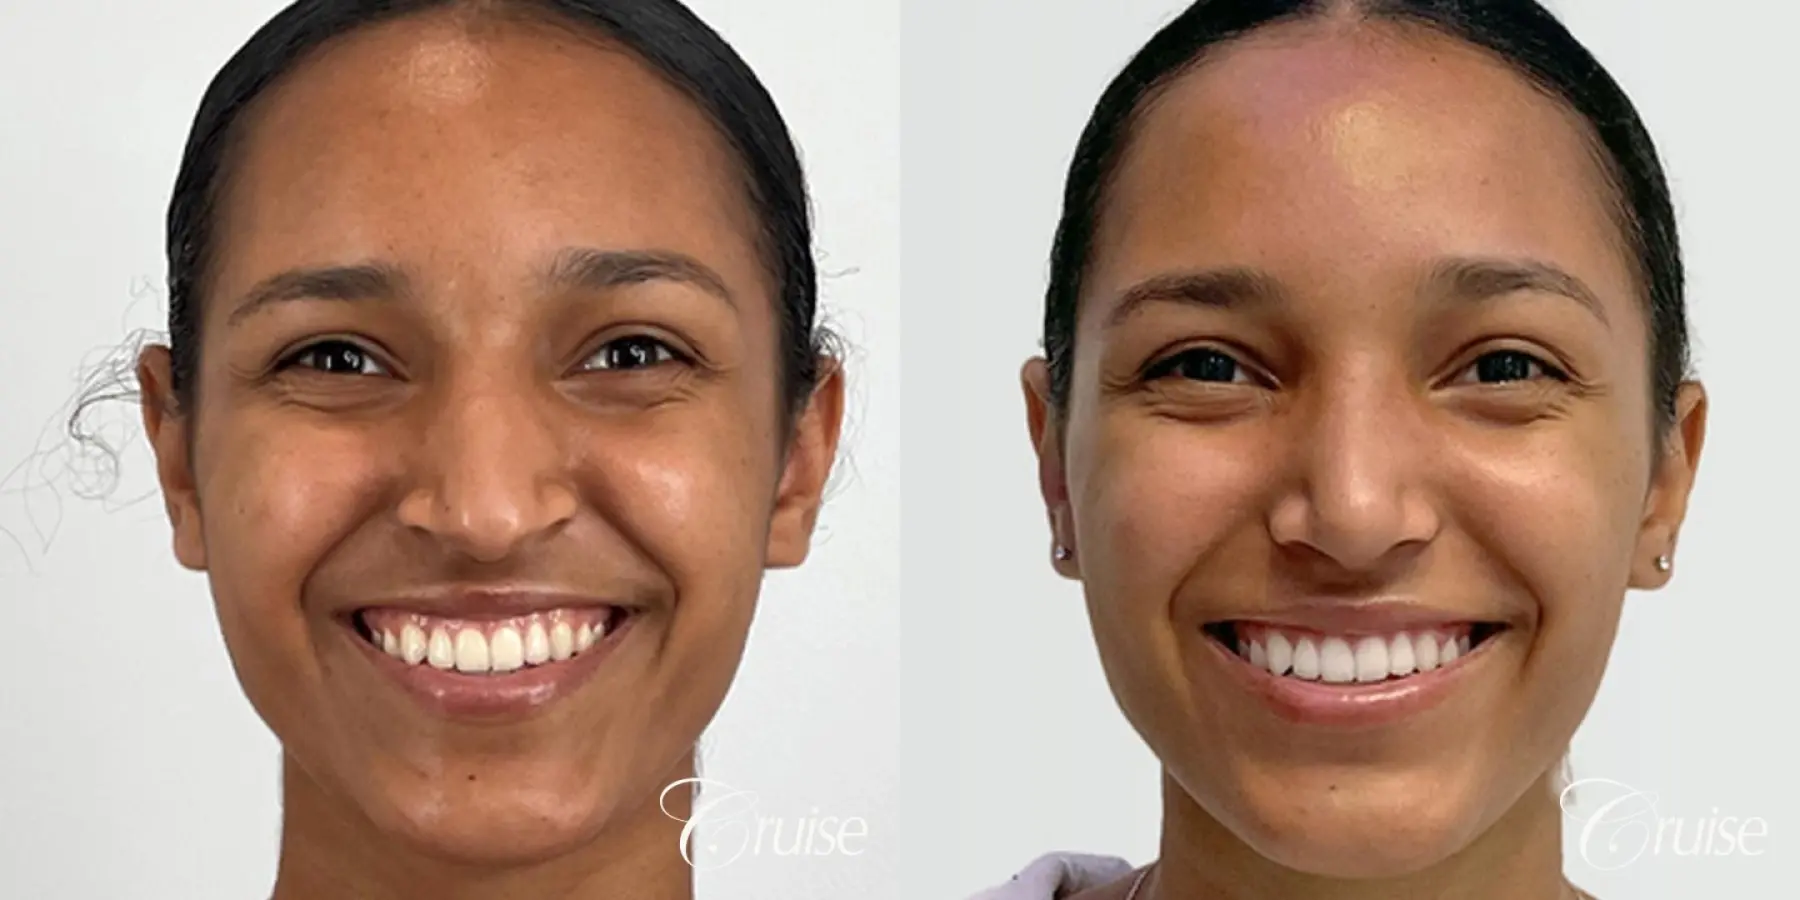 Open Ethnic Rhinoplasty - Before and After